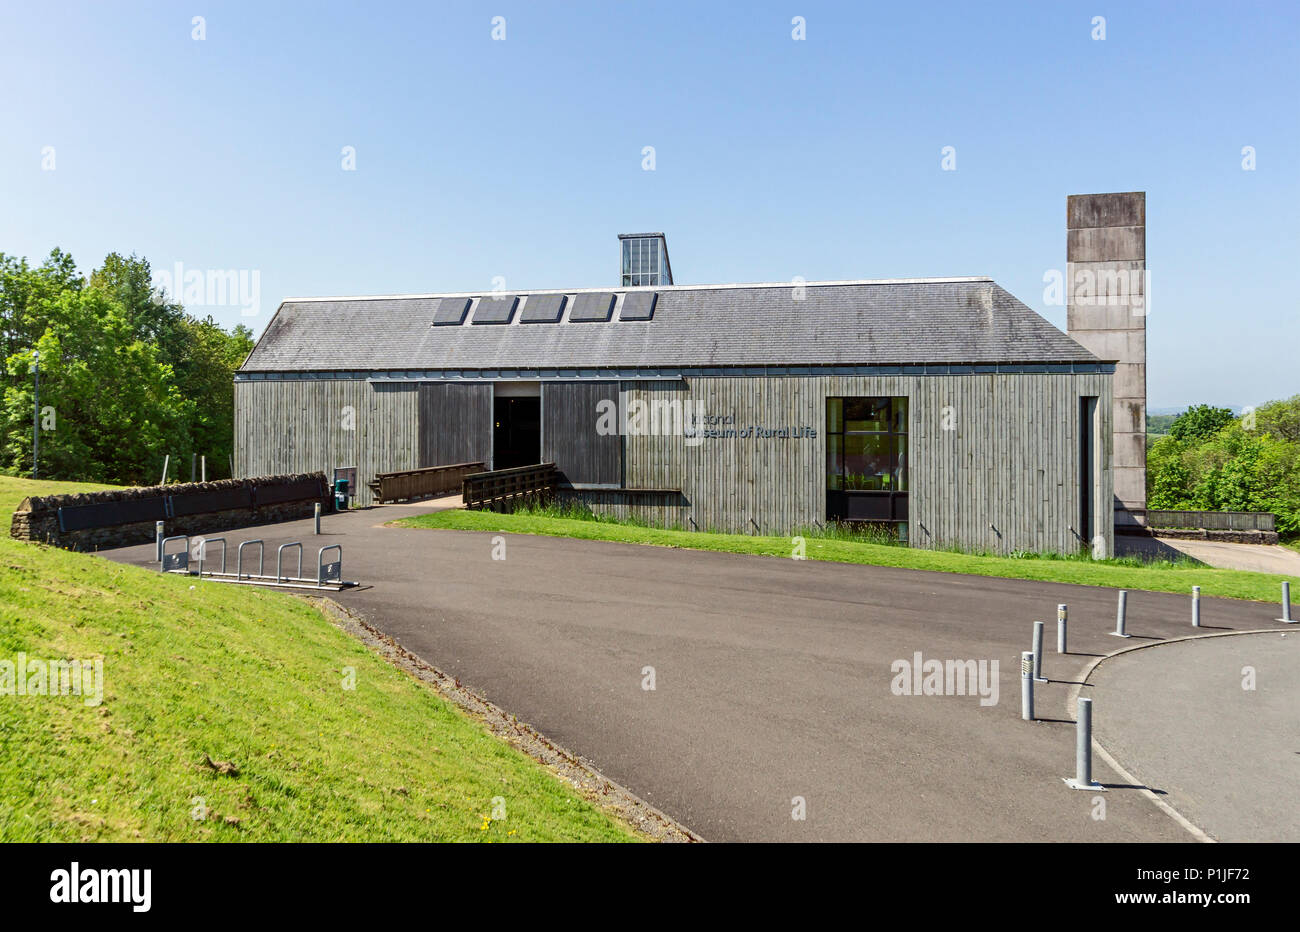 Entrance to National Museum of Rural Life in East Kilbride South Lanarkshire Scotland UK Stock Photo